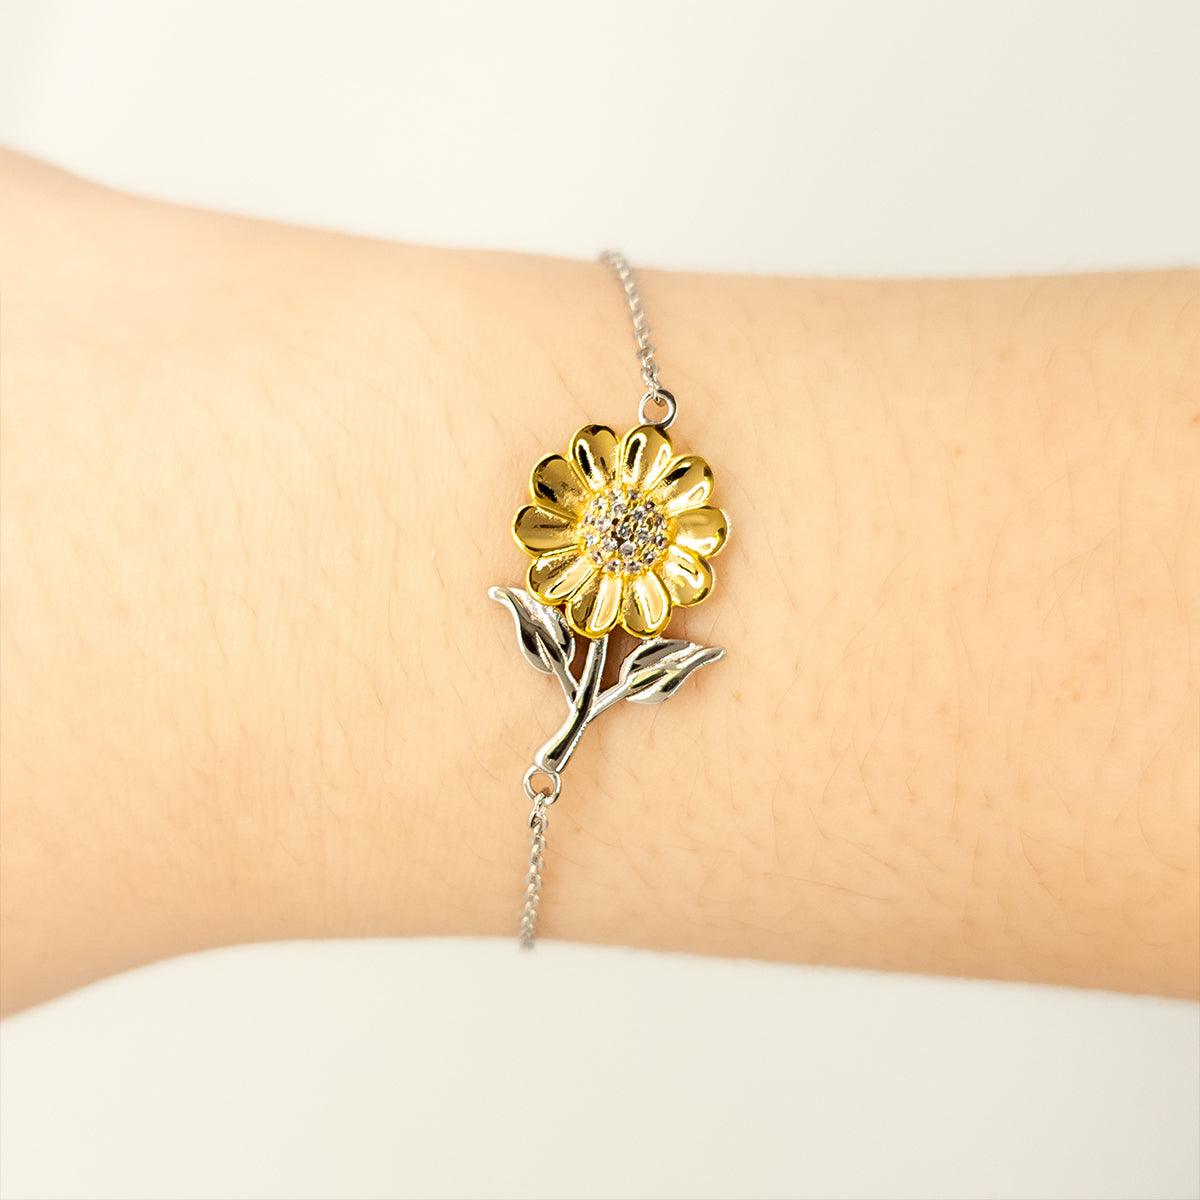 Band Director Sunflower Bracelet - Thanks for being who you are - Birthday Christmas Jewelry Gifts Coworkers Colleague Boss - Mallard Moon Gift Shop